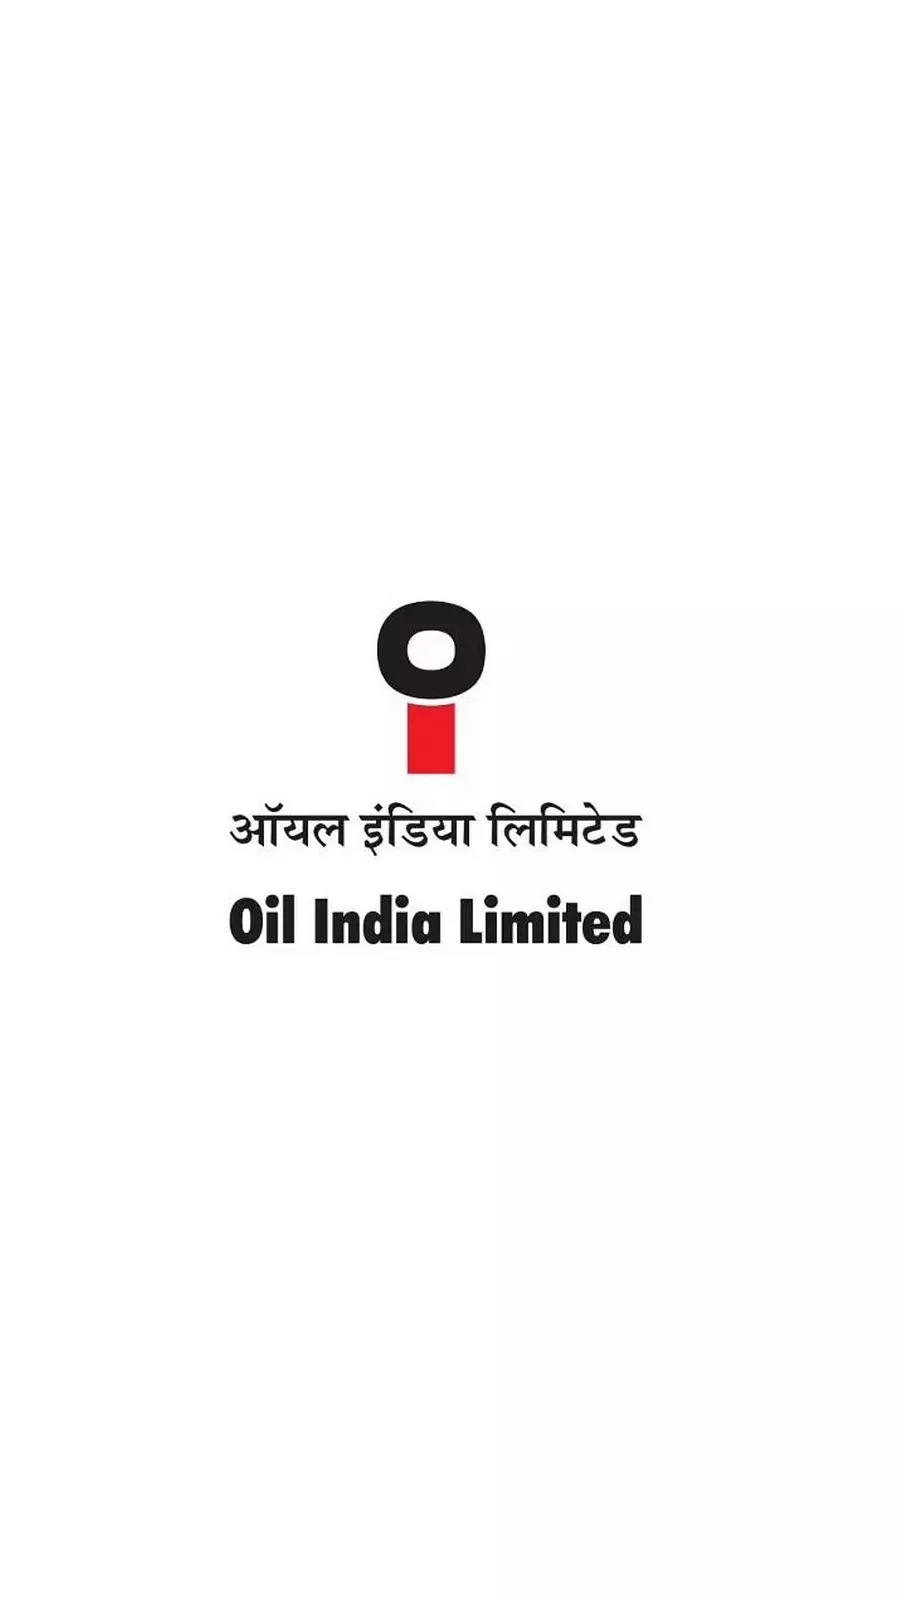 OIL India Limited Recruitment 2021 | Graduate Engineer | B.E, B.Tech |  Apply Now | Engineering jobs, Recruitment, Electrical jobs